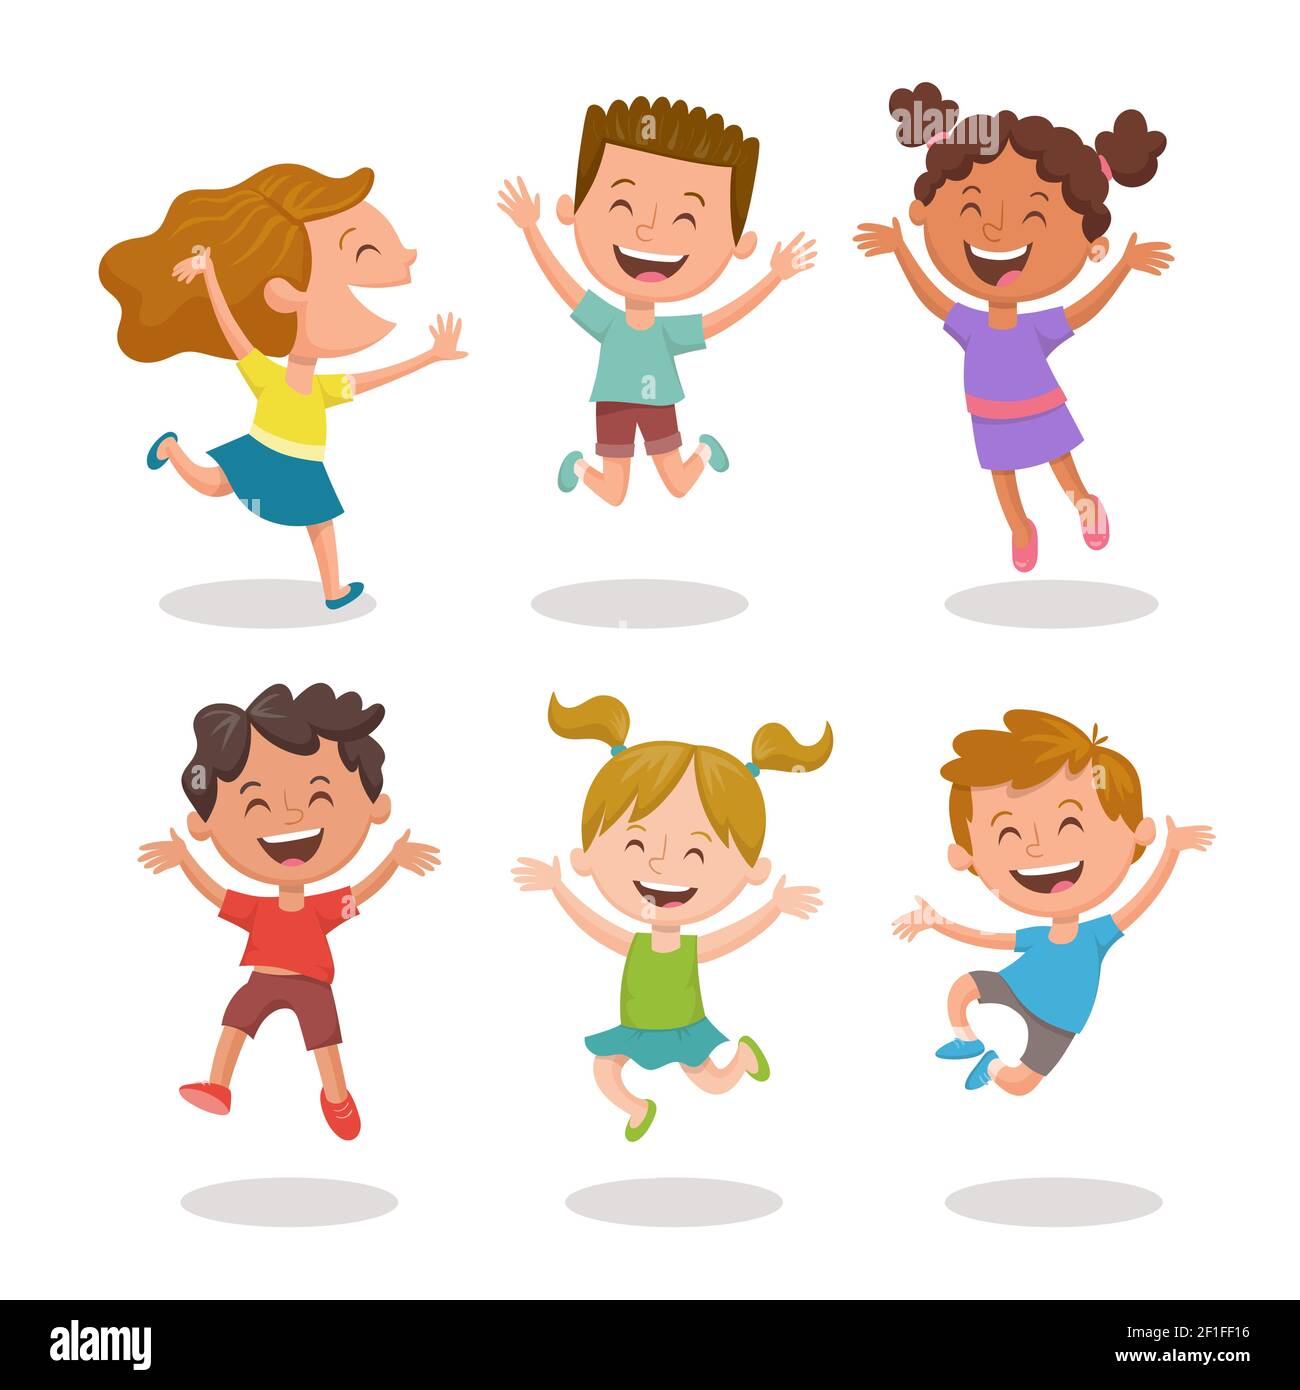 Happy multiracial kids joyfully jumping and laughing. Cartoon character design, isolated on white background. Set 1 of 3. Stock Vector